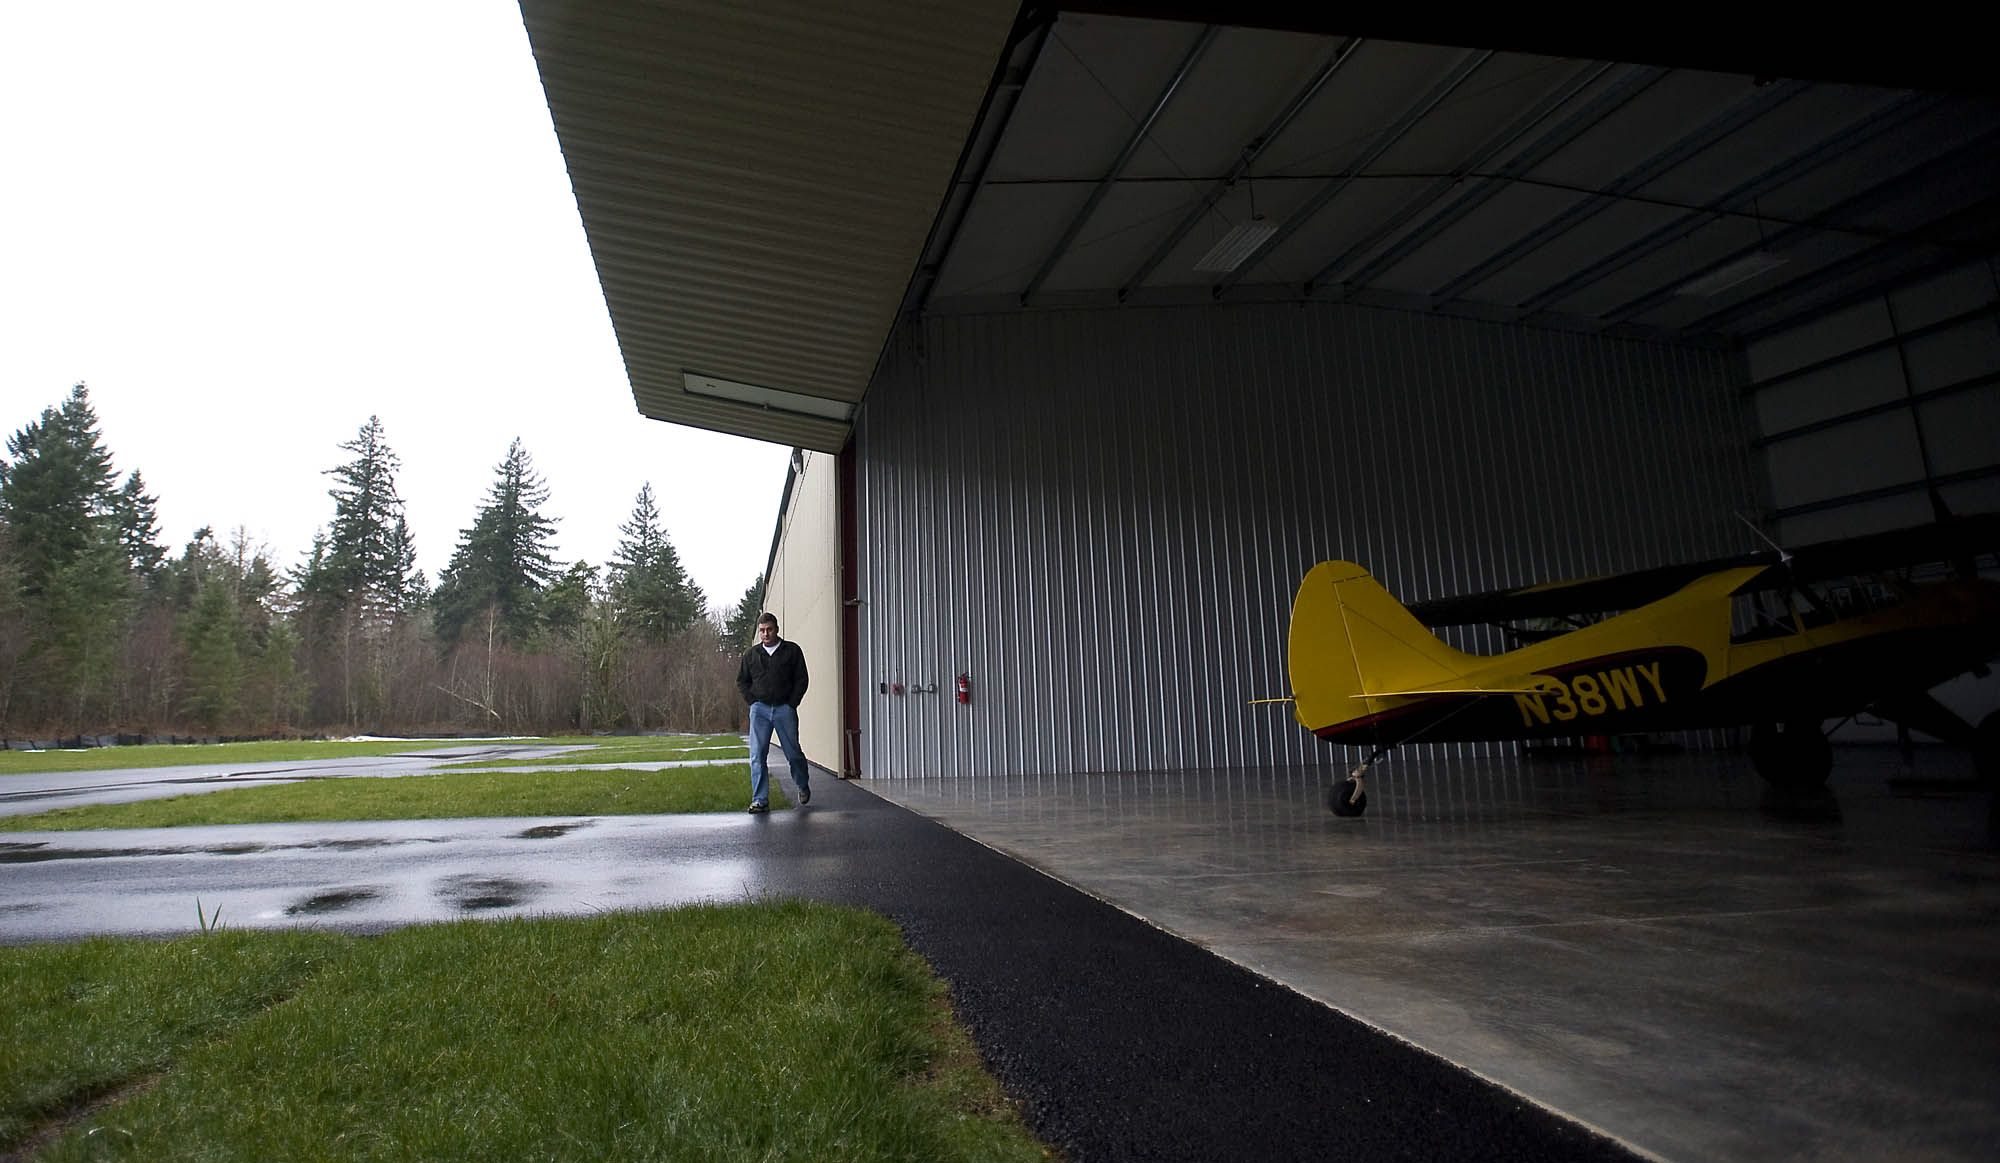 The Port of Camas-Washougal has signed long-term leases for hangars at Grove Field, and new structures continue to rise there.